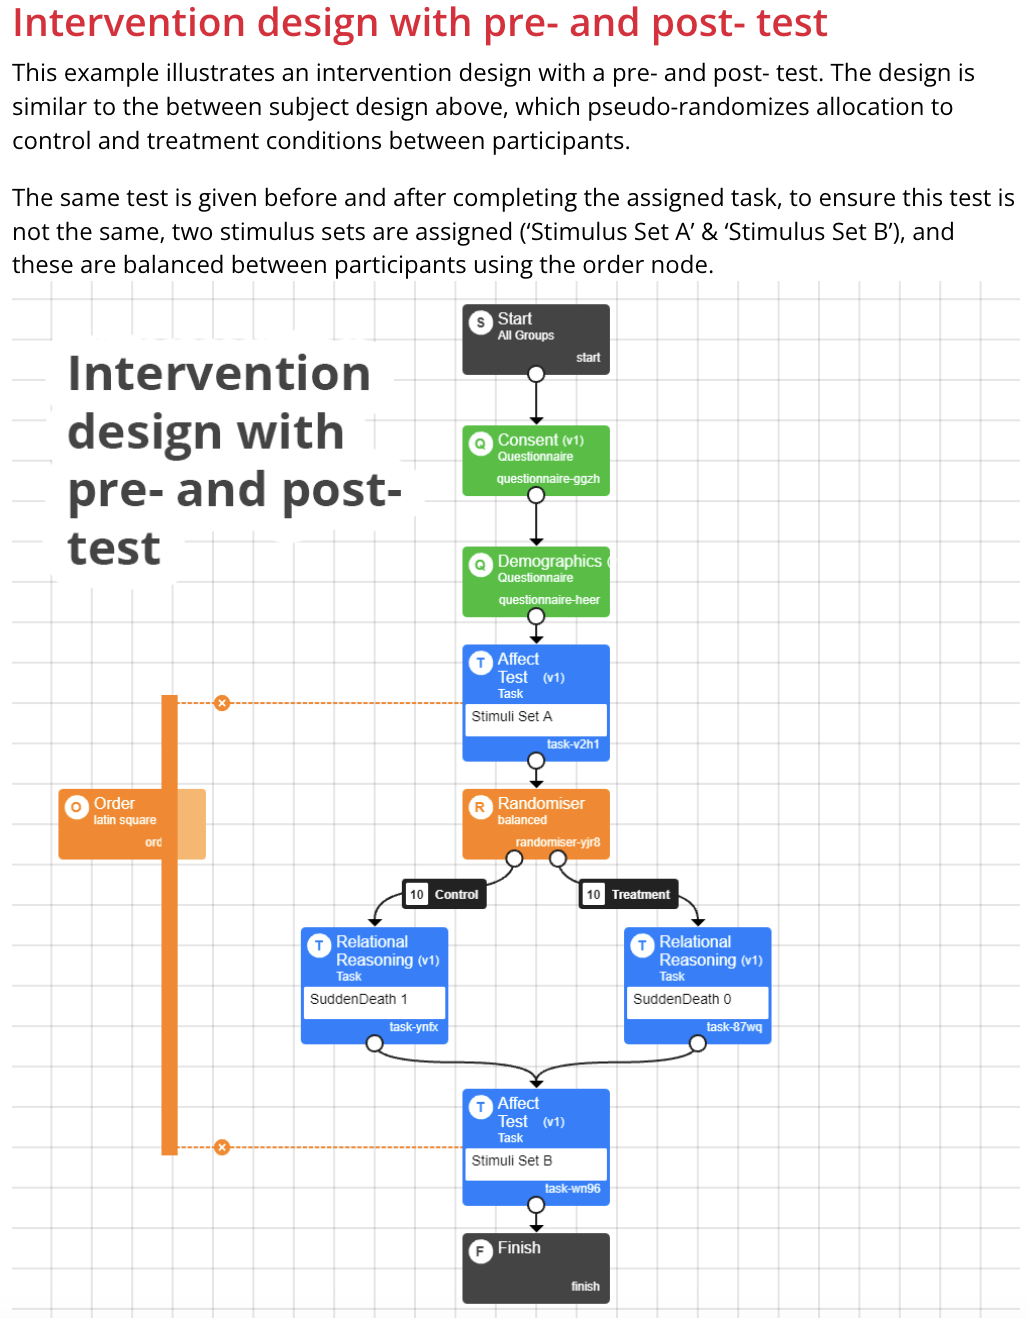 Gorilla Experiment Tree - Intervention design with pre- and post- test